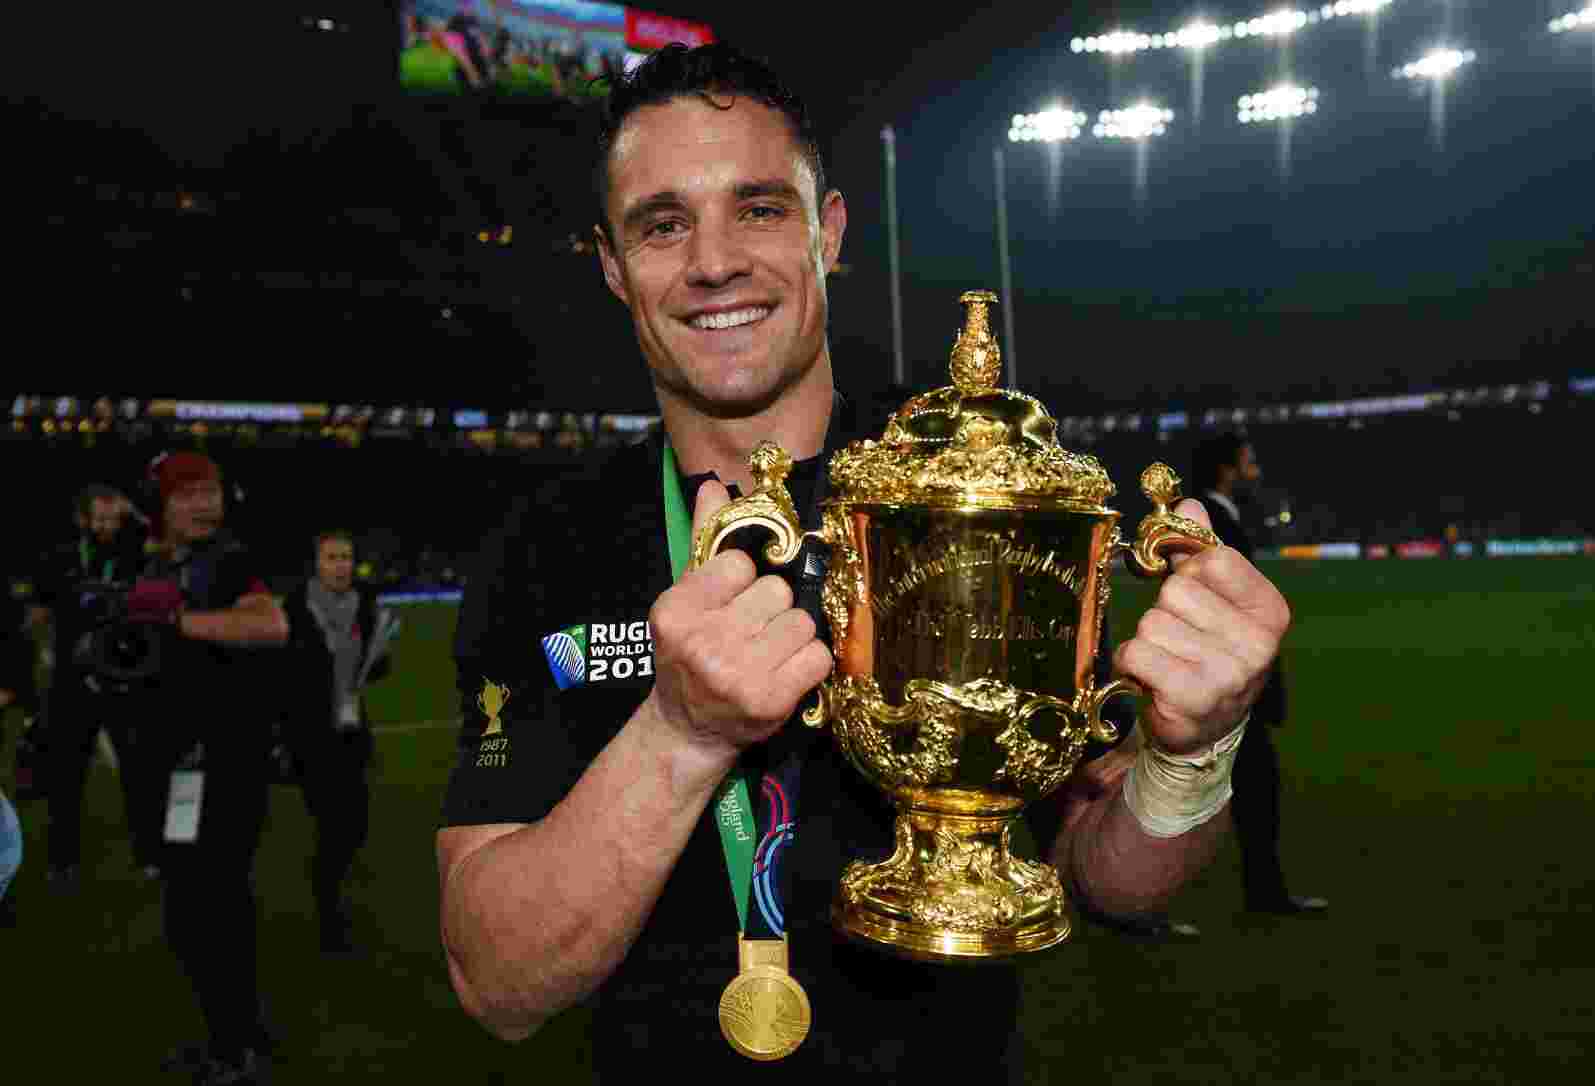 Dan Carter inducted into Rugby Hall of Fame